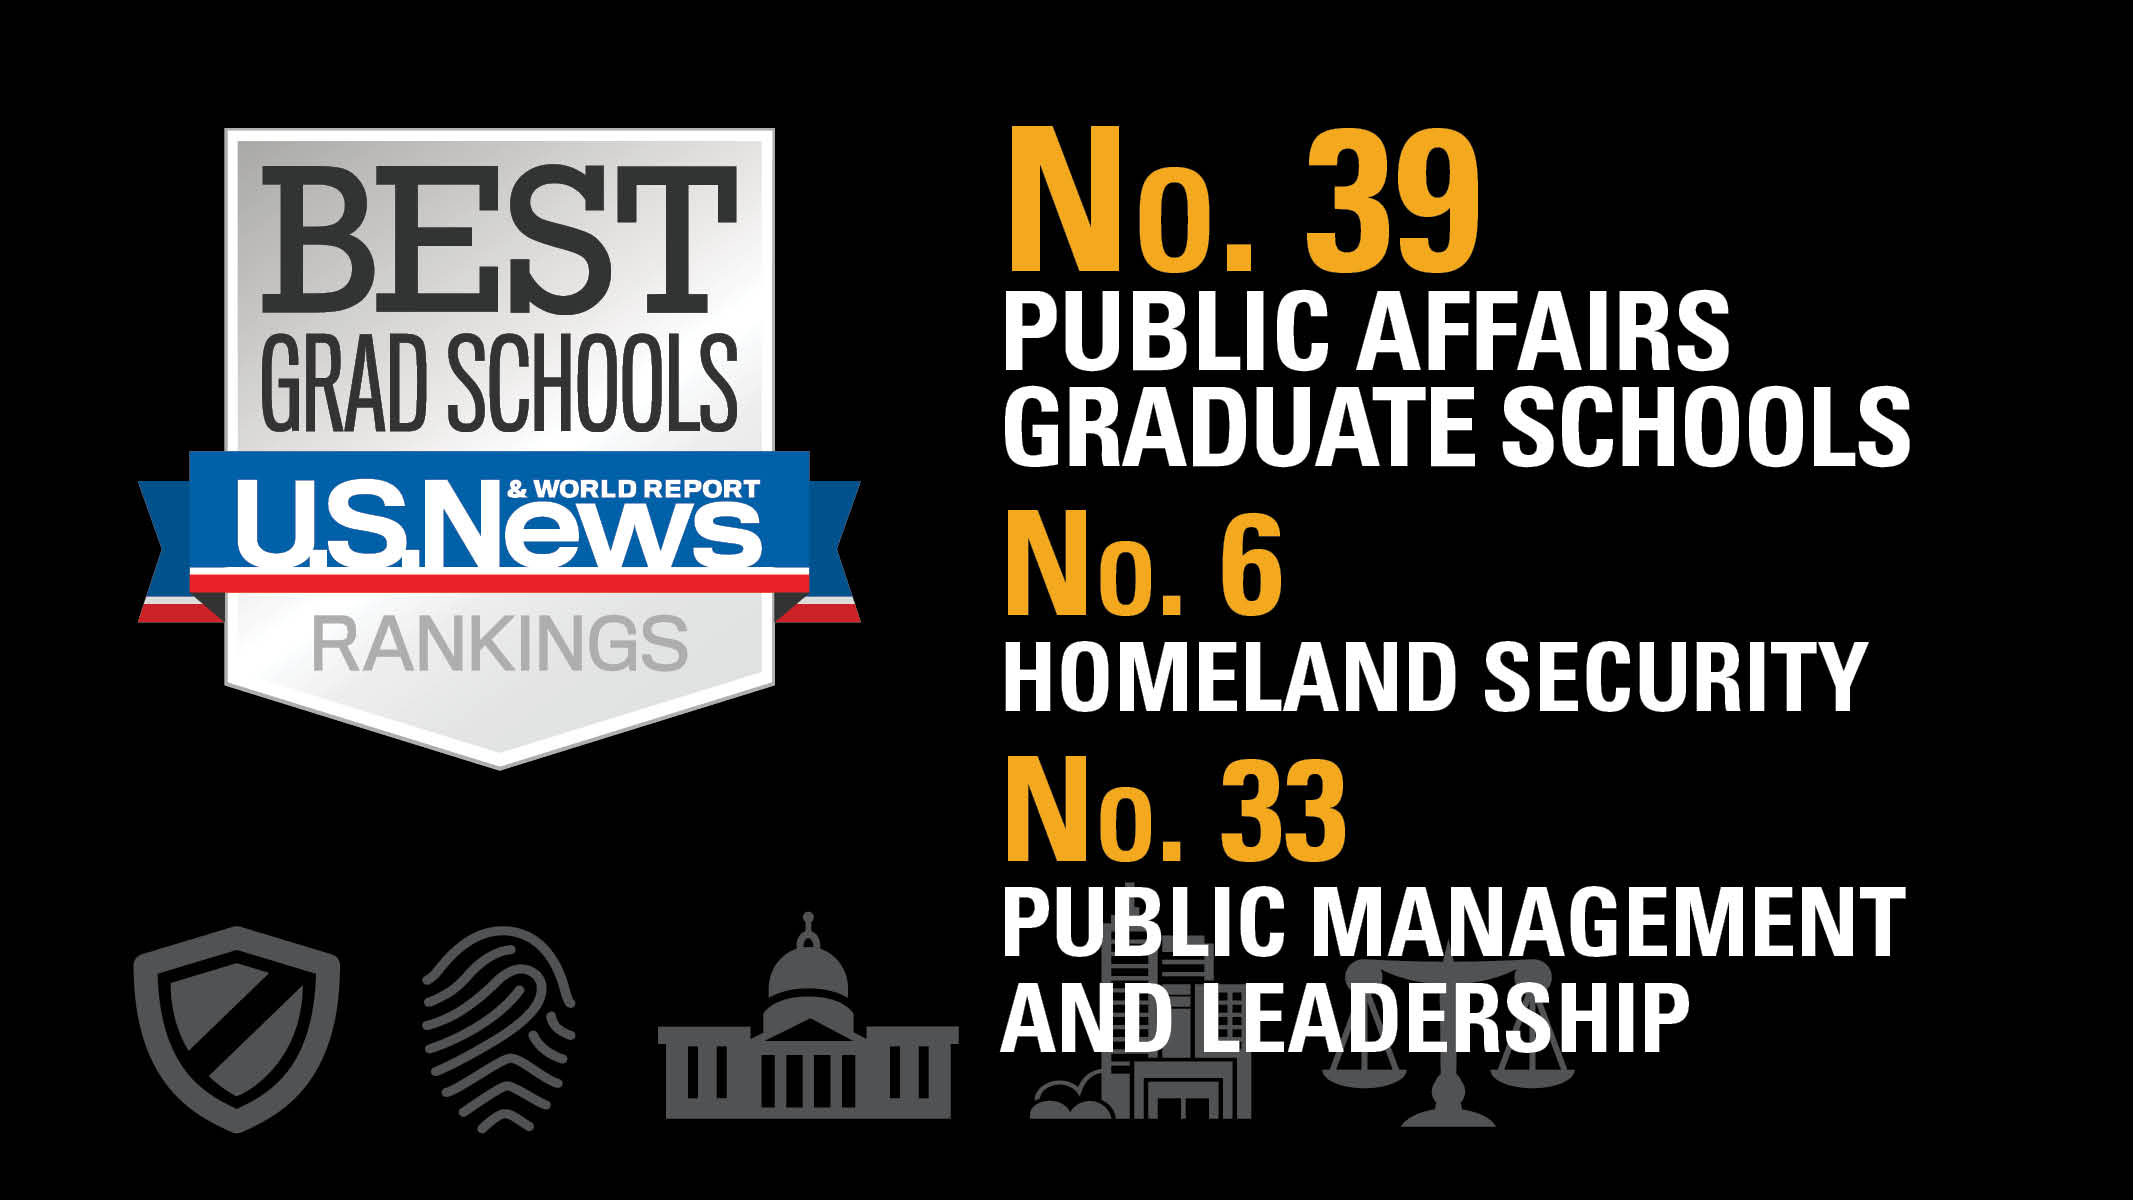 Rising to New Heights: The Wilder School ranks No. 6 in Homeland Security, No. 33 in Public Management and Leadership, and stands strong at No. 39 in Public Affairs Graduate Schools according to the 2024 U.S. News & World Report.